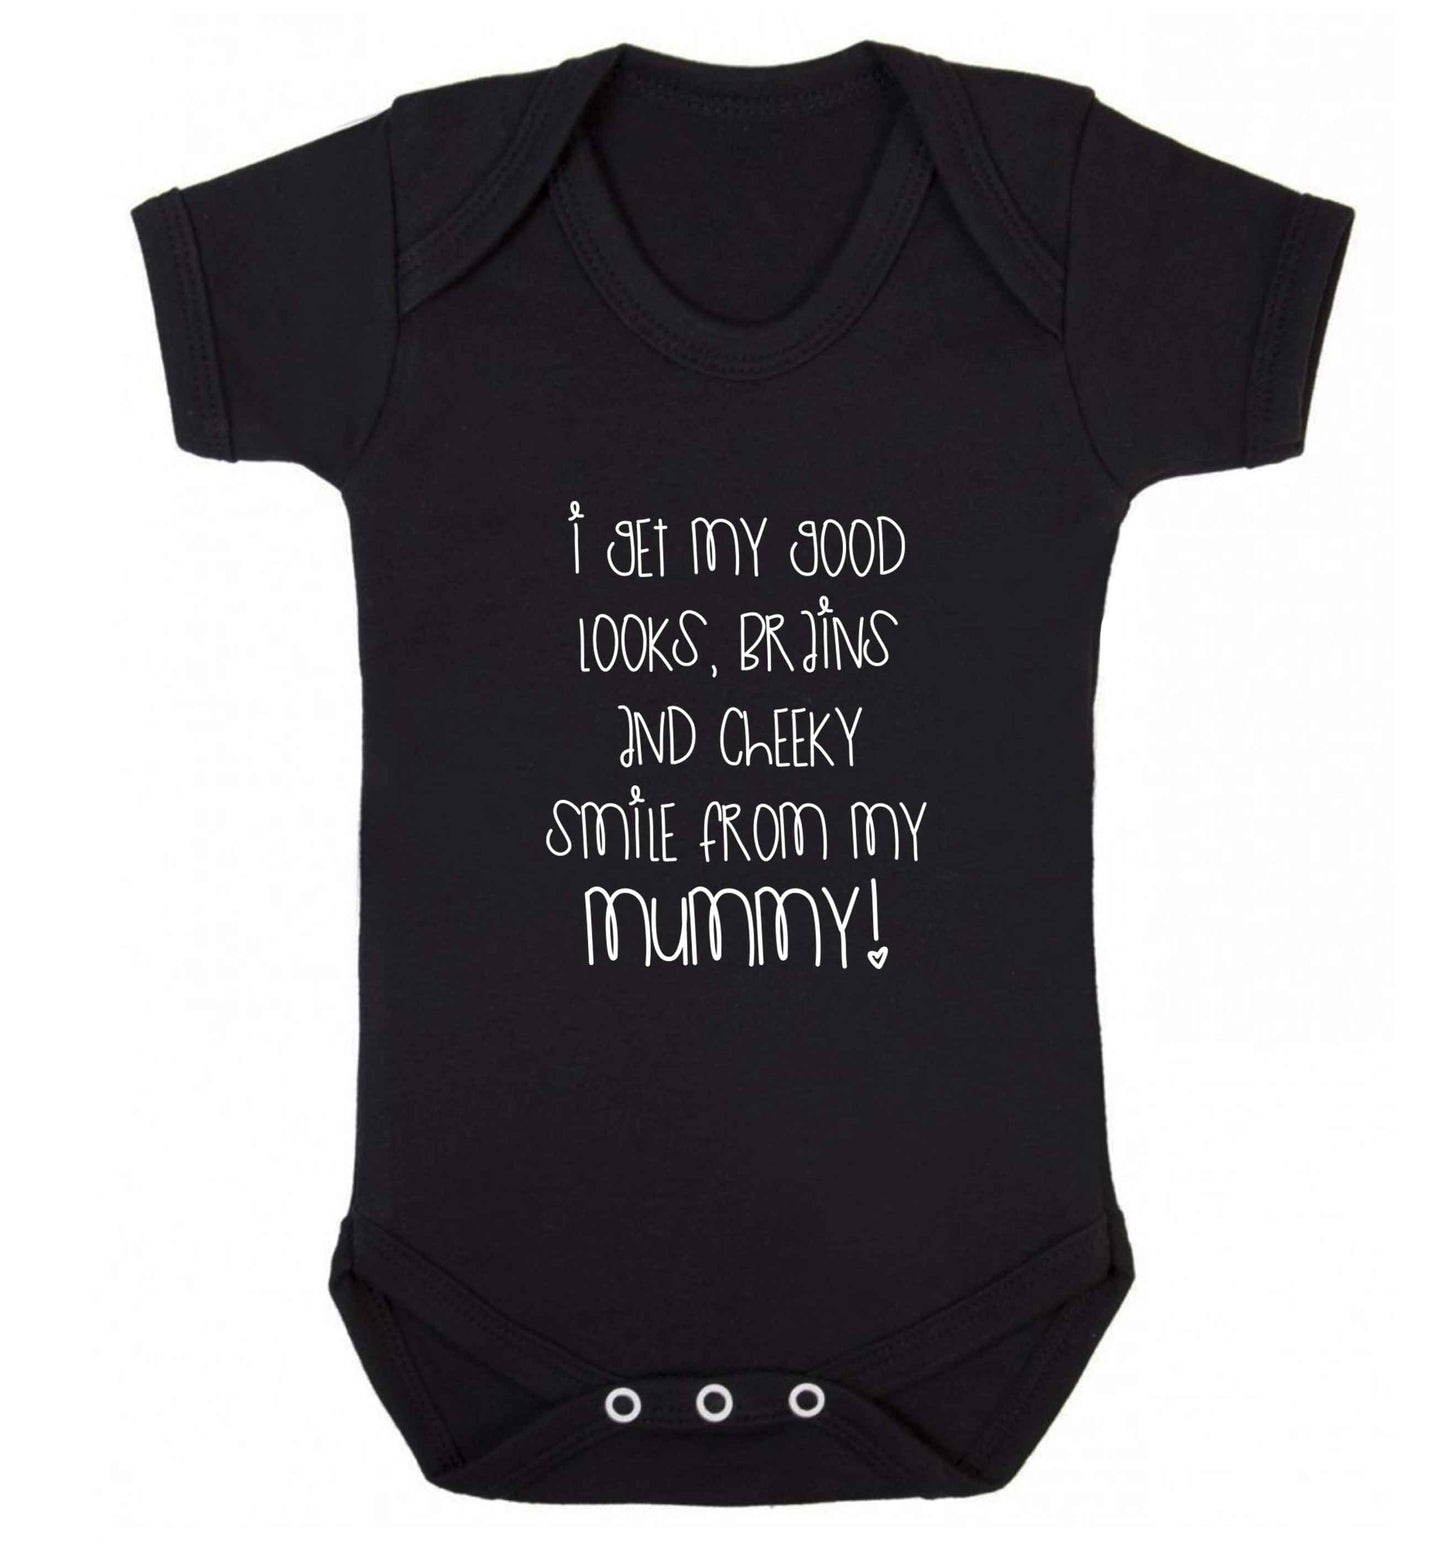 I get my good looks, brains and cheeky smile from my mummy baby vest black 18-24 months